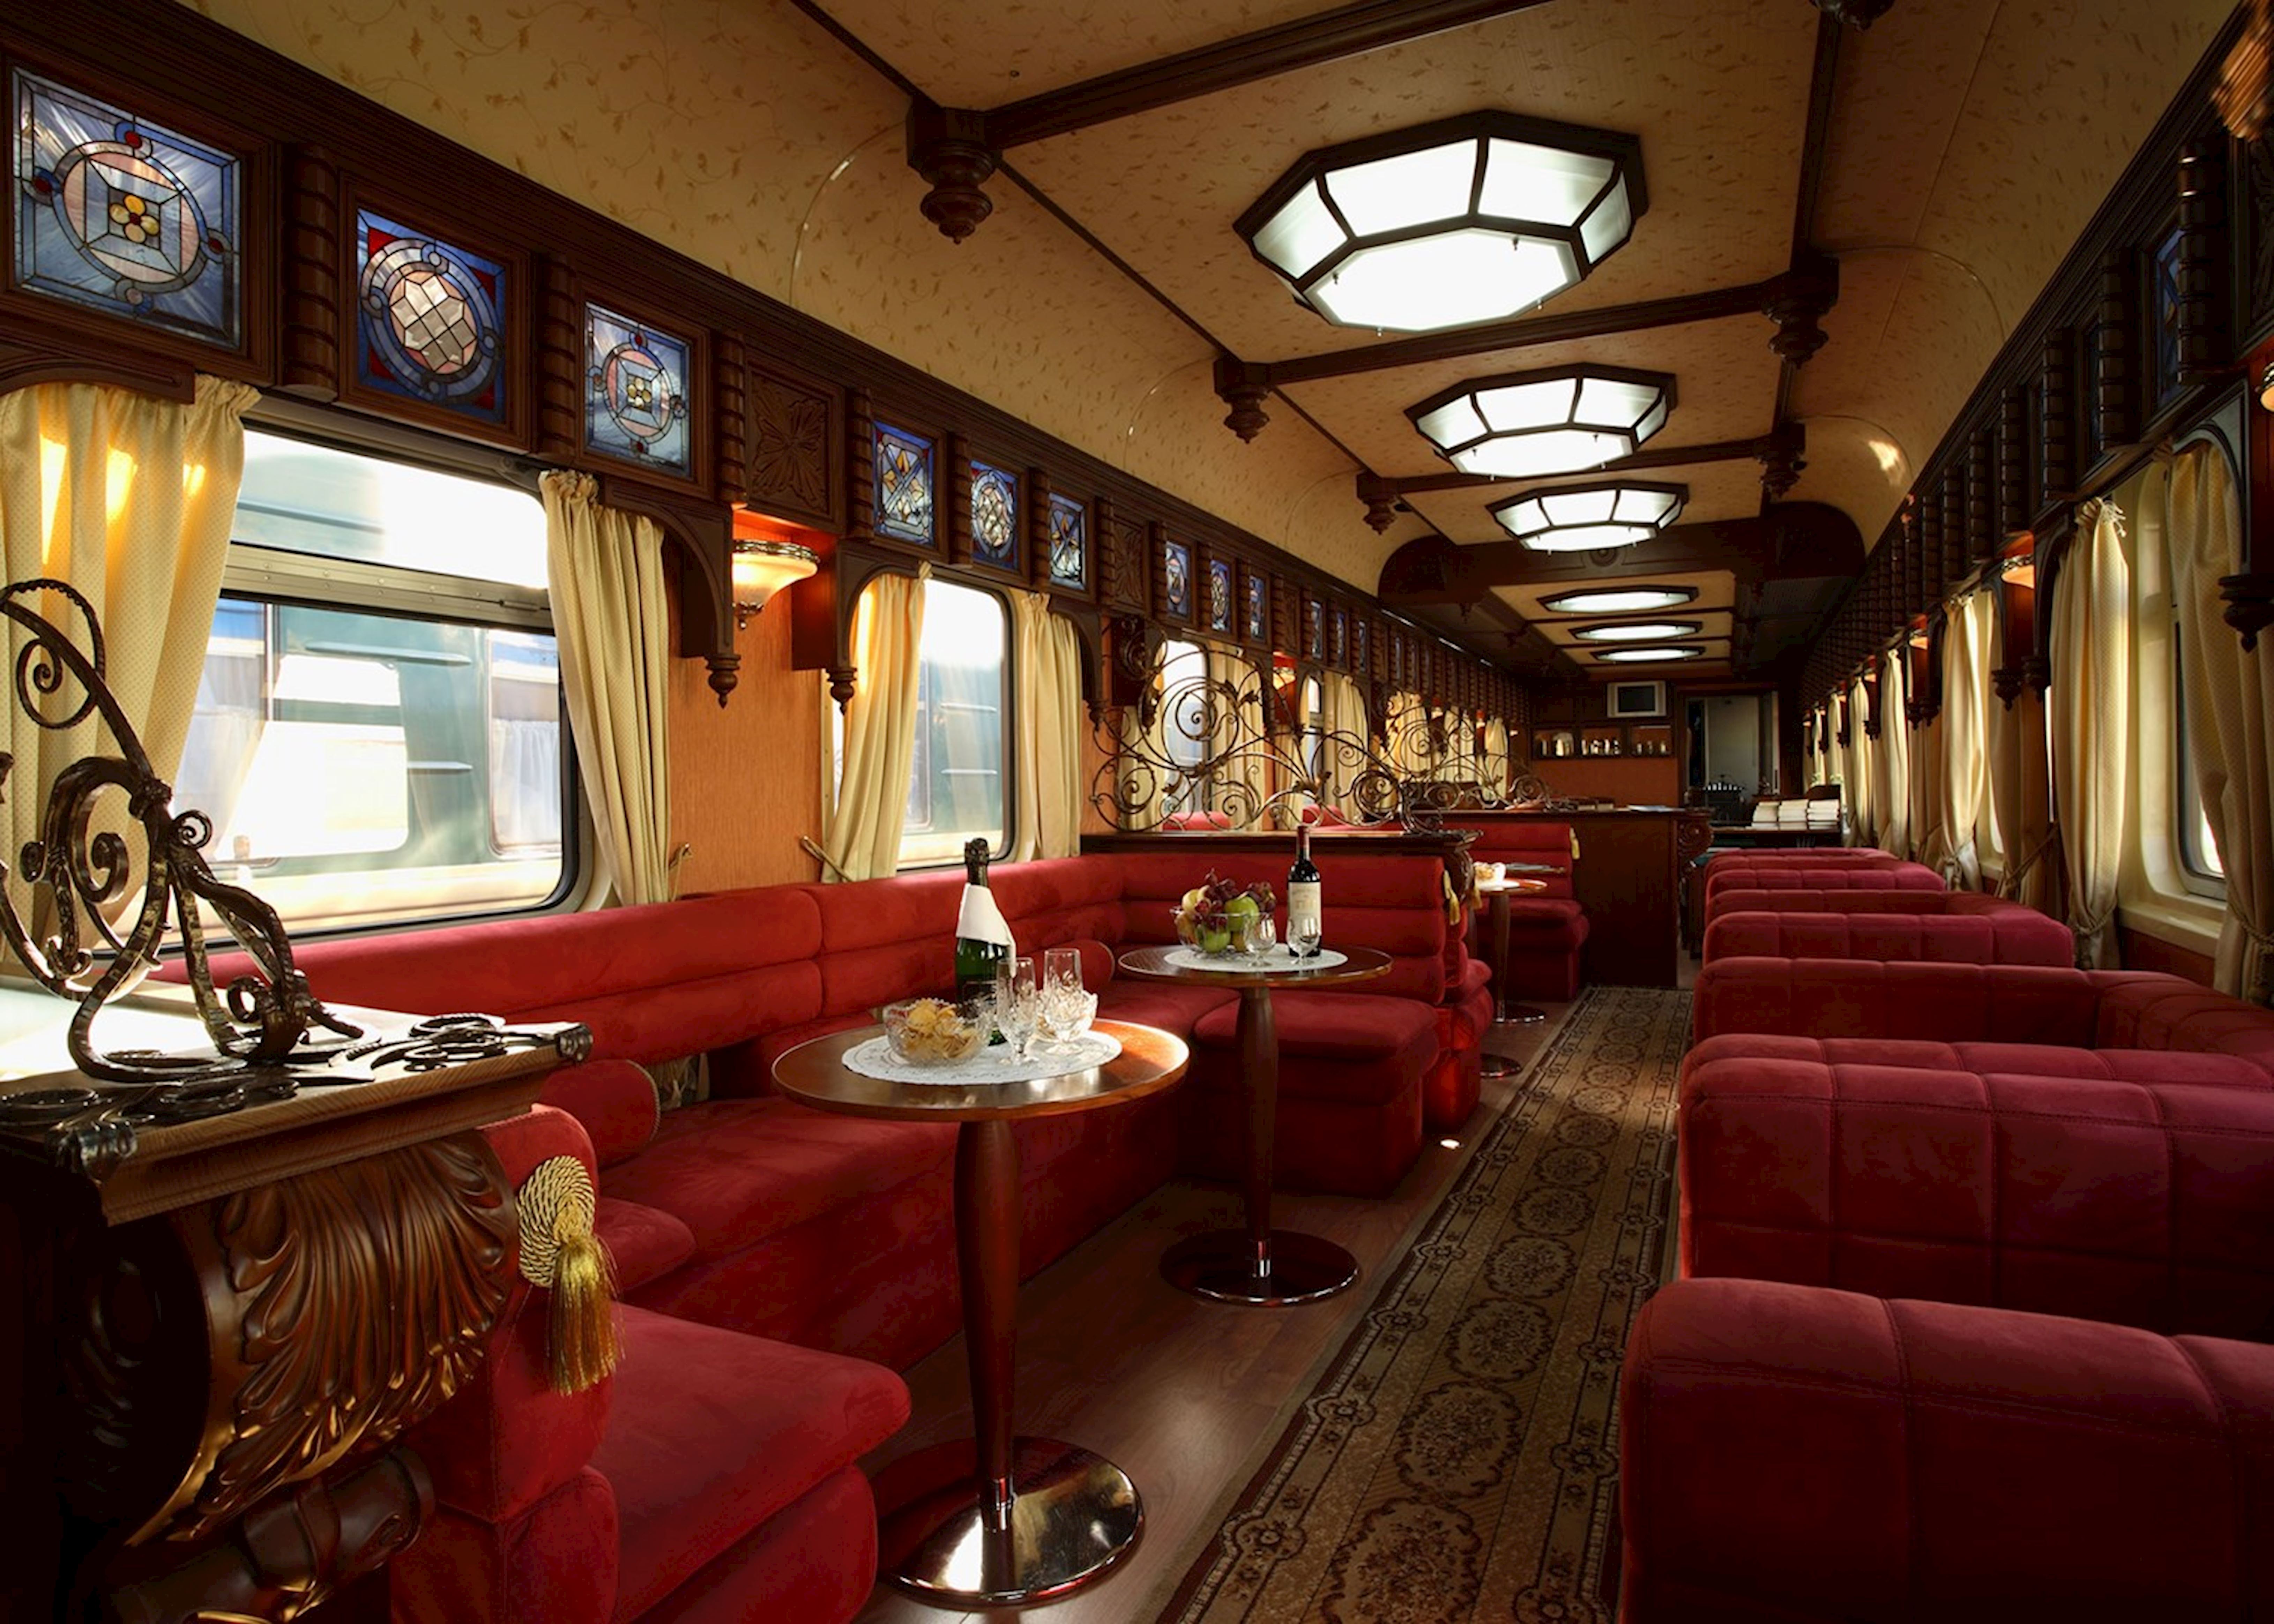 Golden Eagle luxury train | Hotels in Moscow | Audley Travel